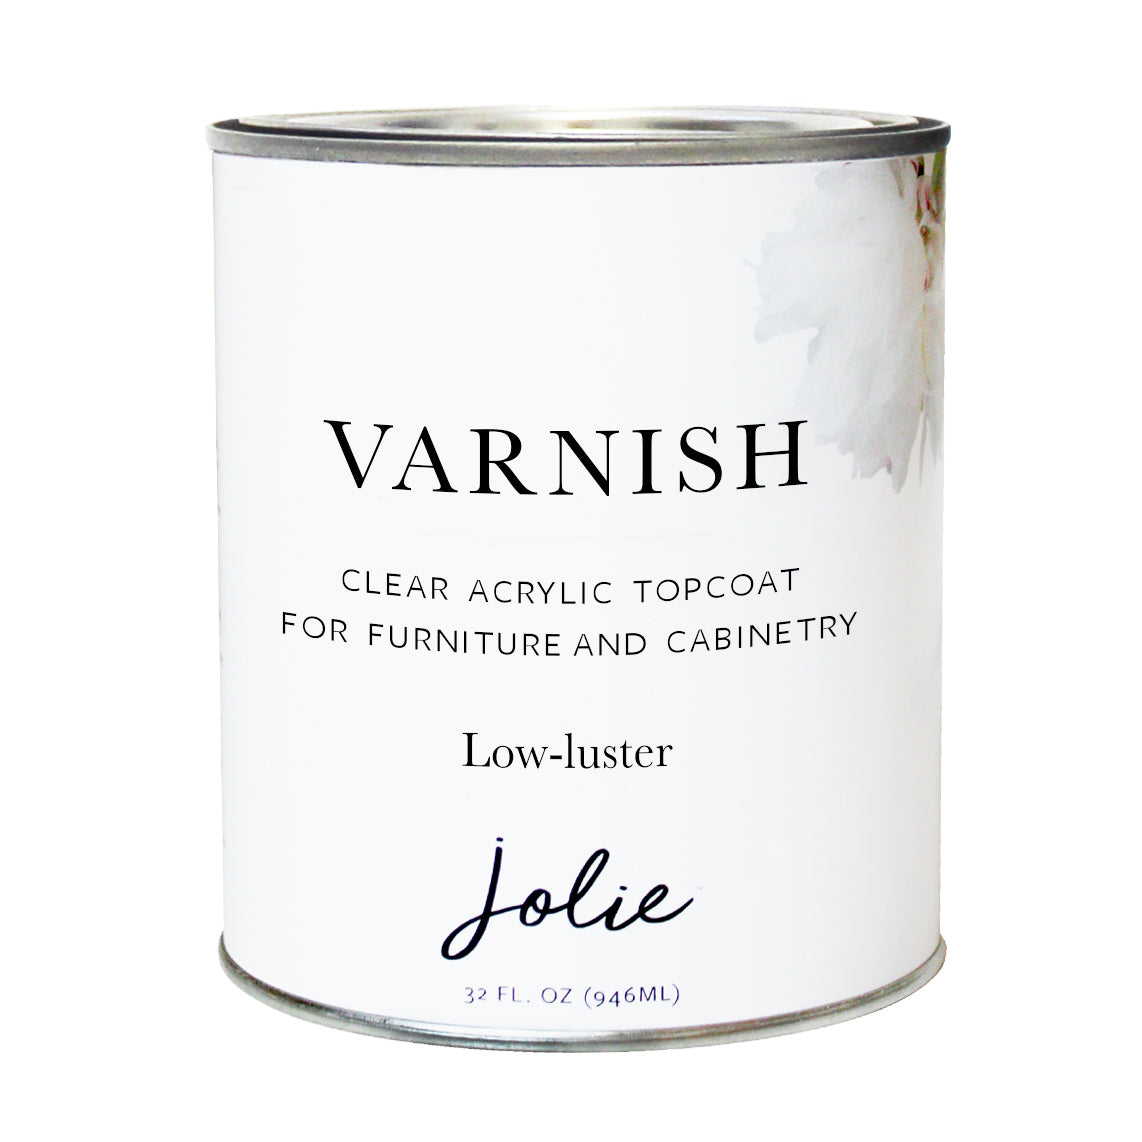 Jolie Varnish Clear Acrylic Topcoat for Chalk Finish Paint Use Over Stained or Raw Wood- Furniture and Cabinetry Durable at MechanicSurplus.com